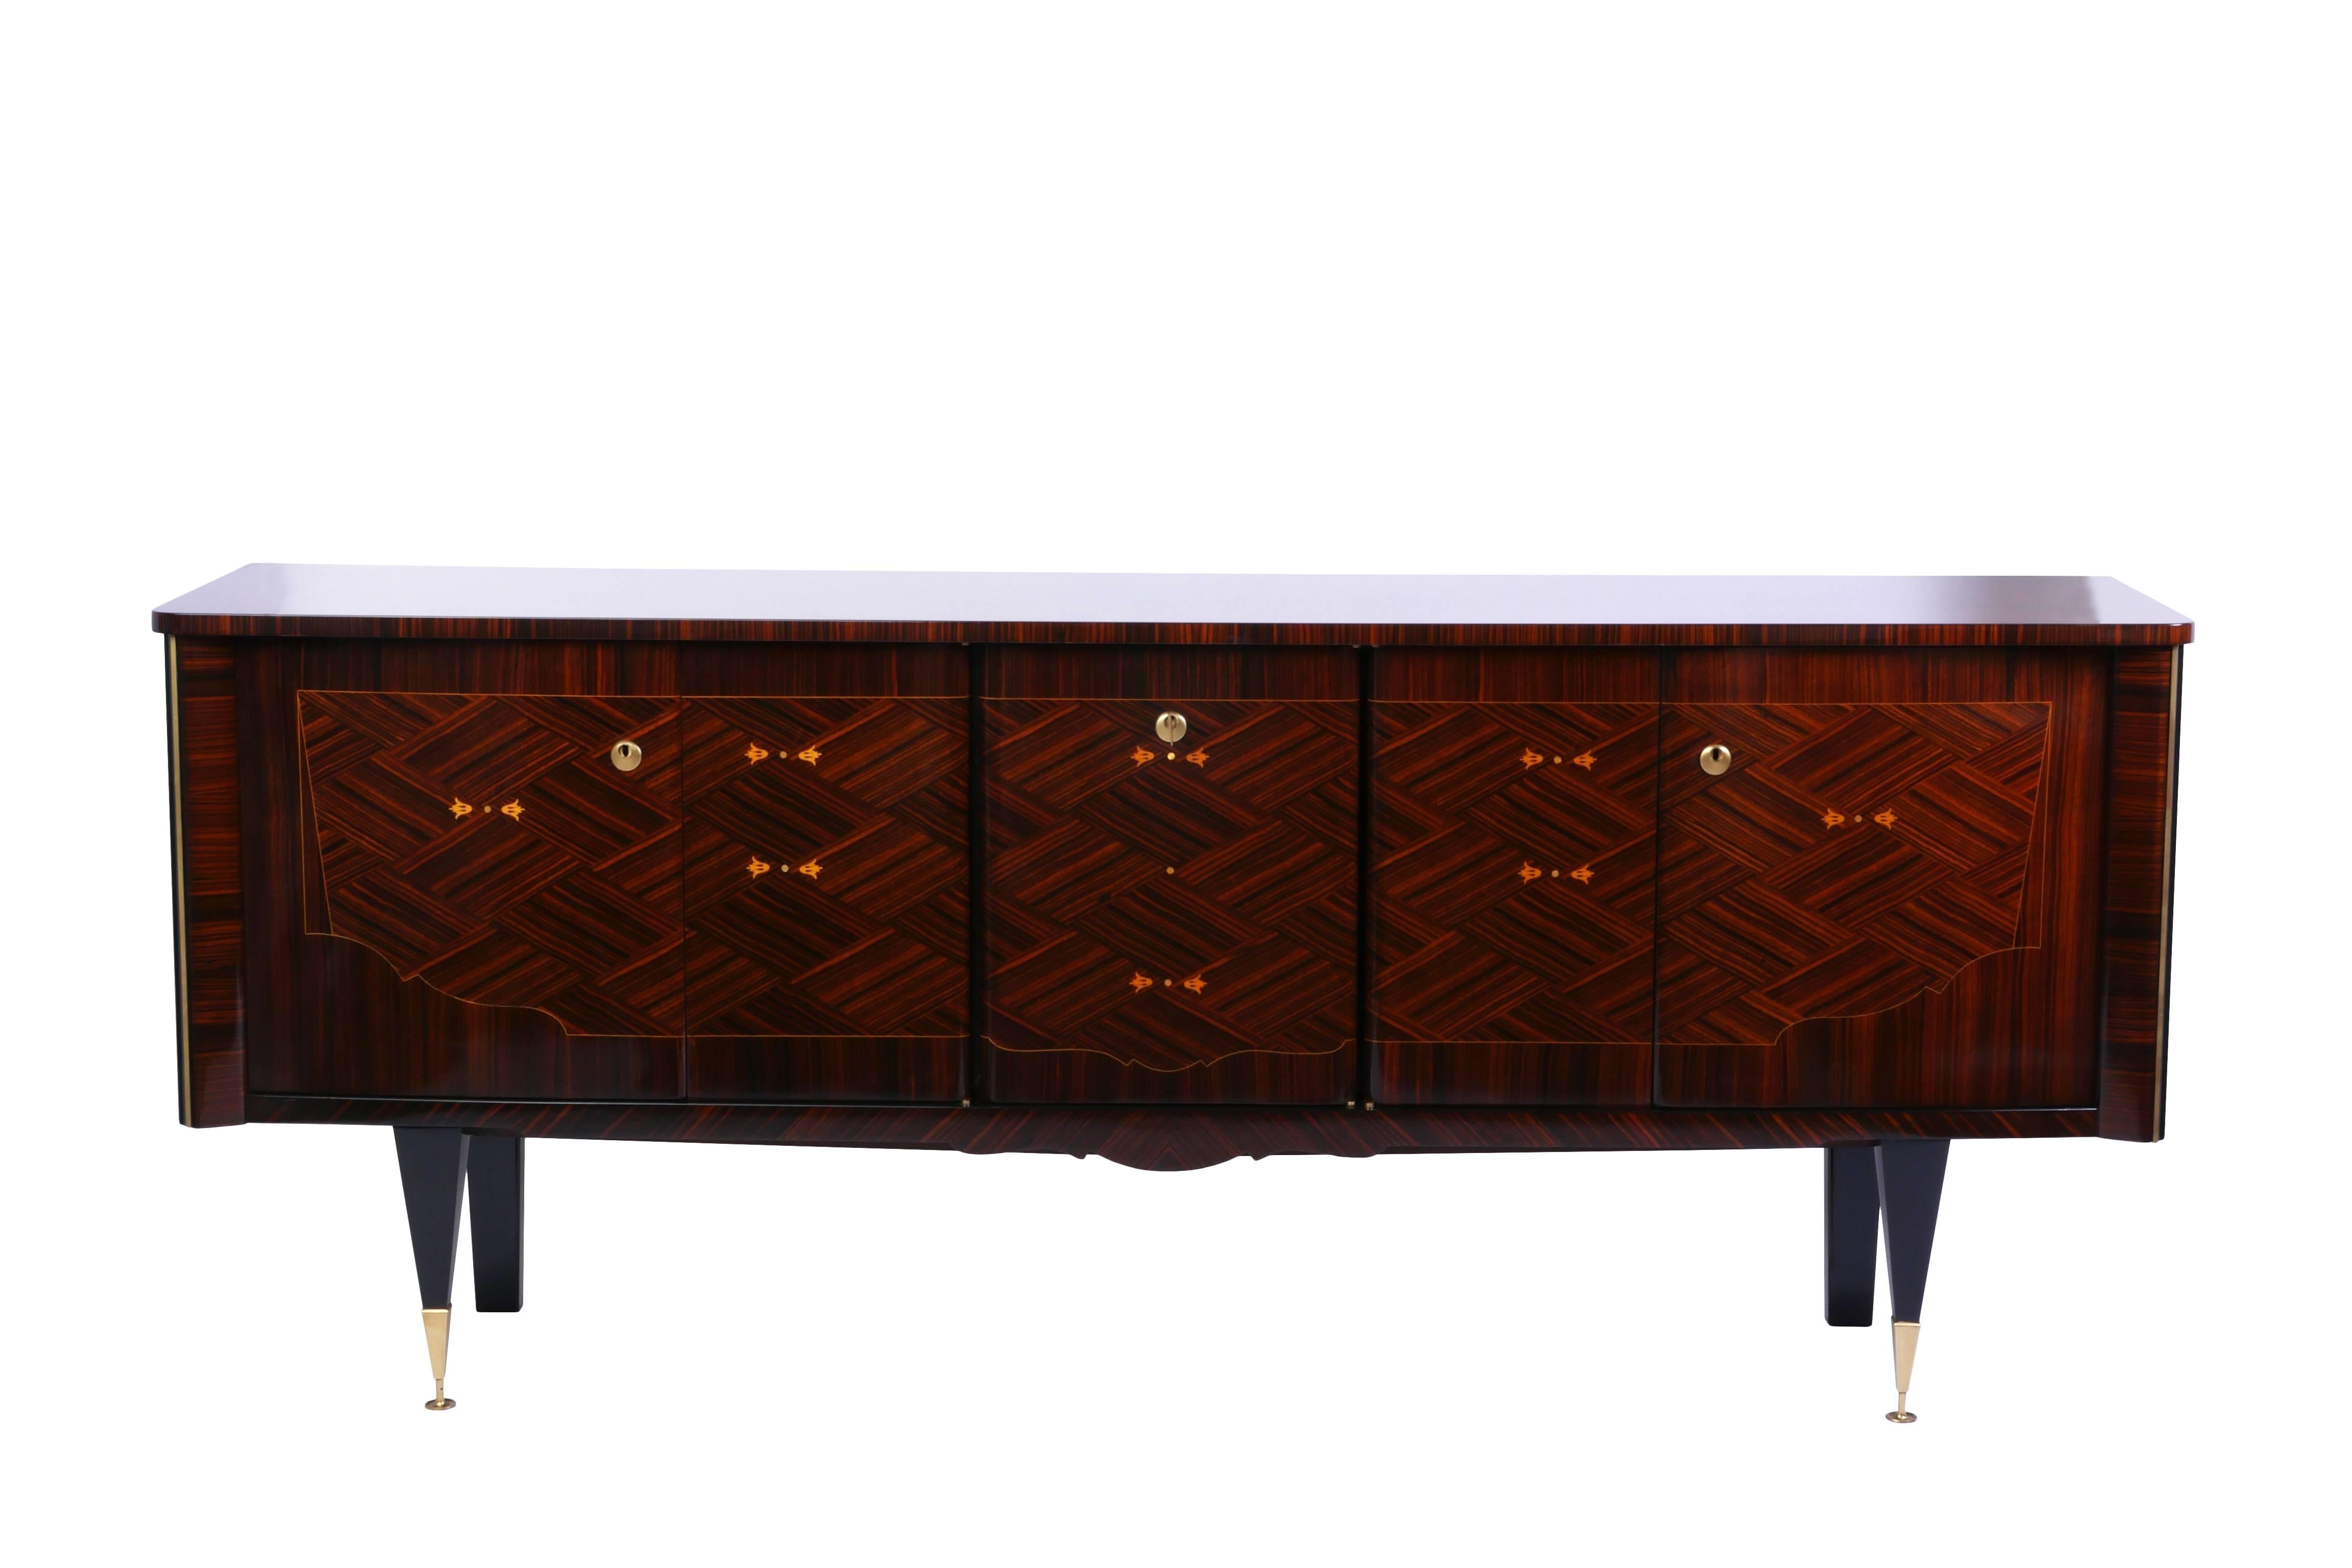 A French Art Deco buffet or sideboard in Macassar ebony with interior finished in Lemon-wood. Stunning marquetry and inlay work. Center bar area.